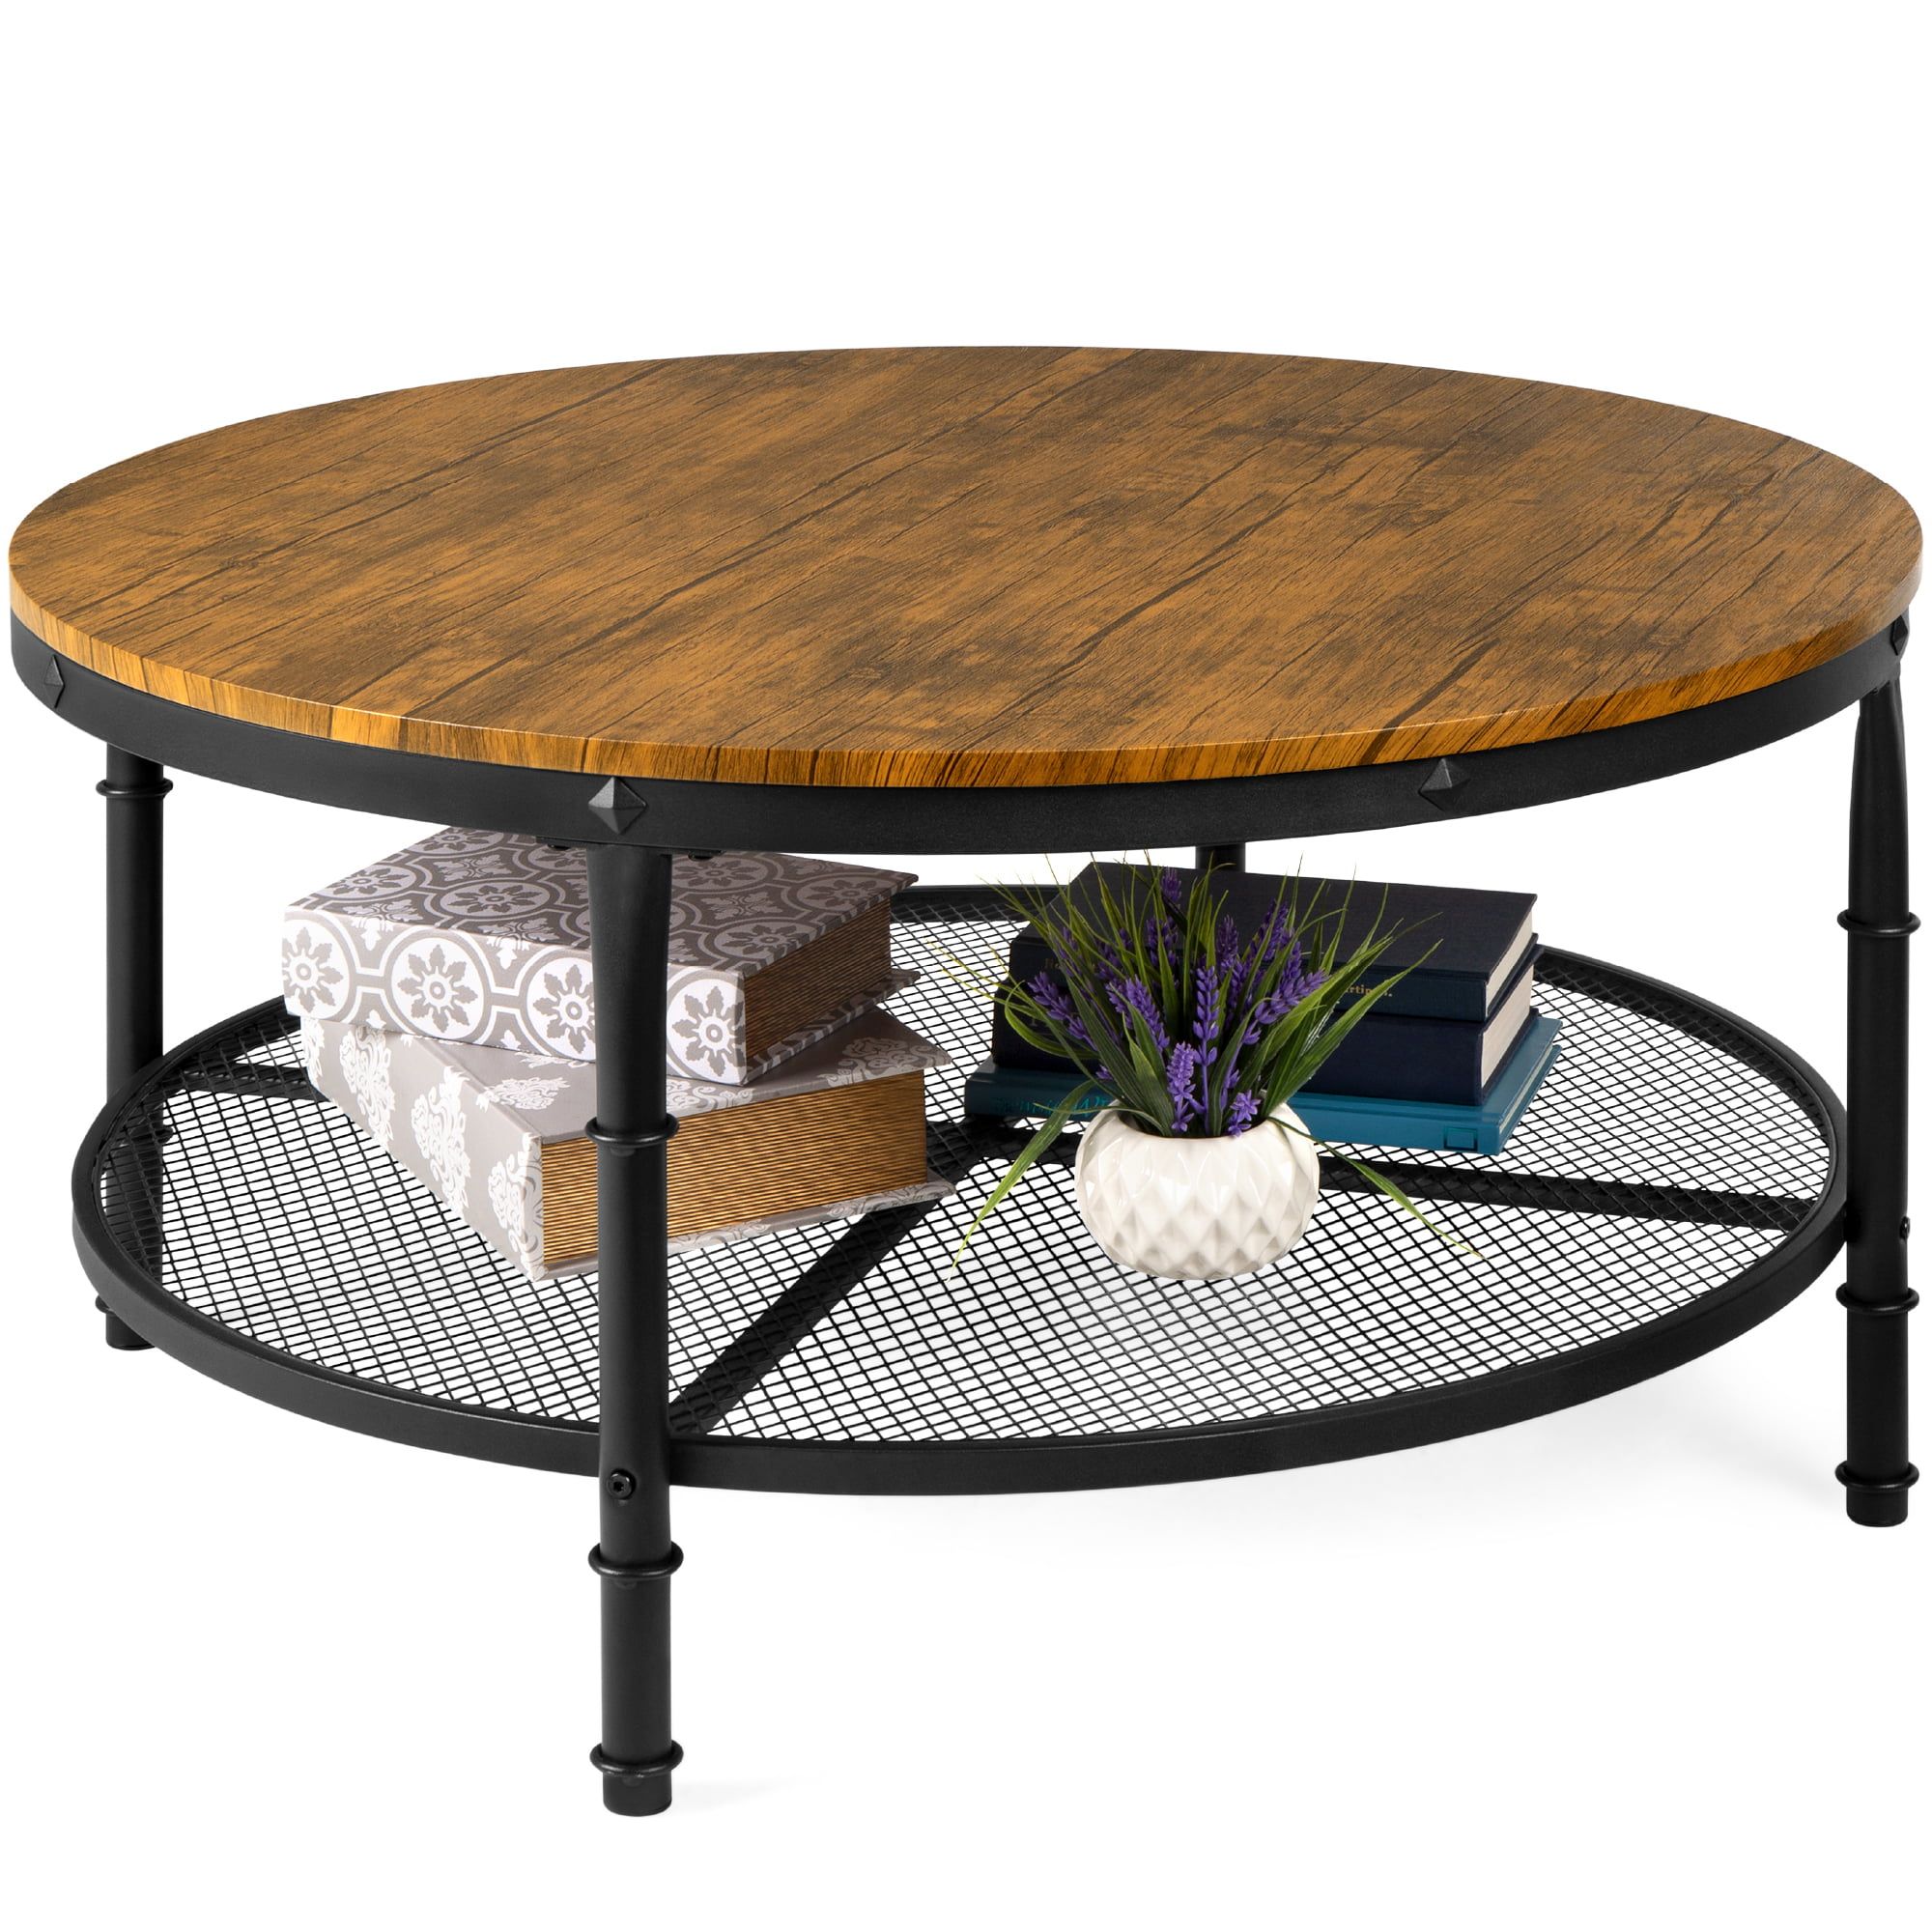 Best Choice Products 2 Tier Round Coffee Table, Rustic Steel Accent Inside Wood Coffee Tables With 2 Tier Storage (View 15 of 20)